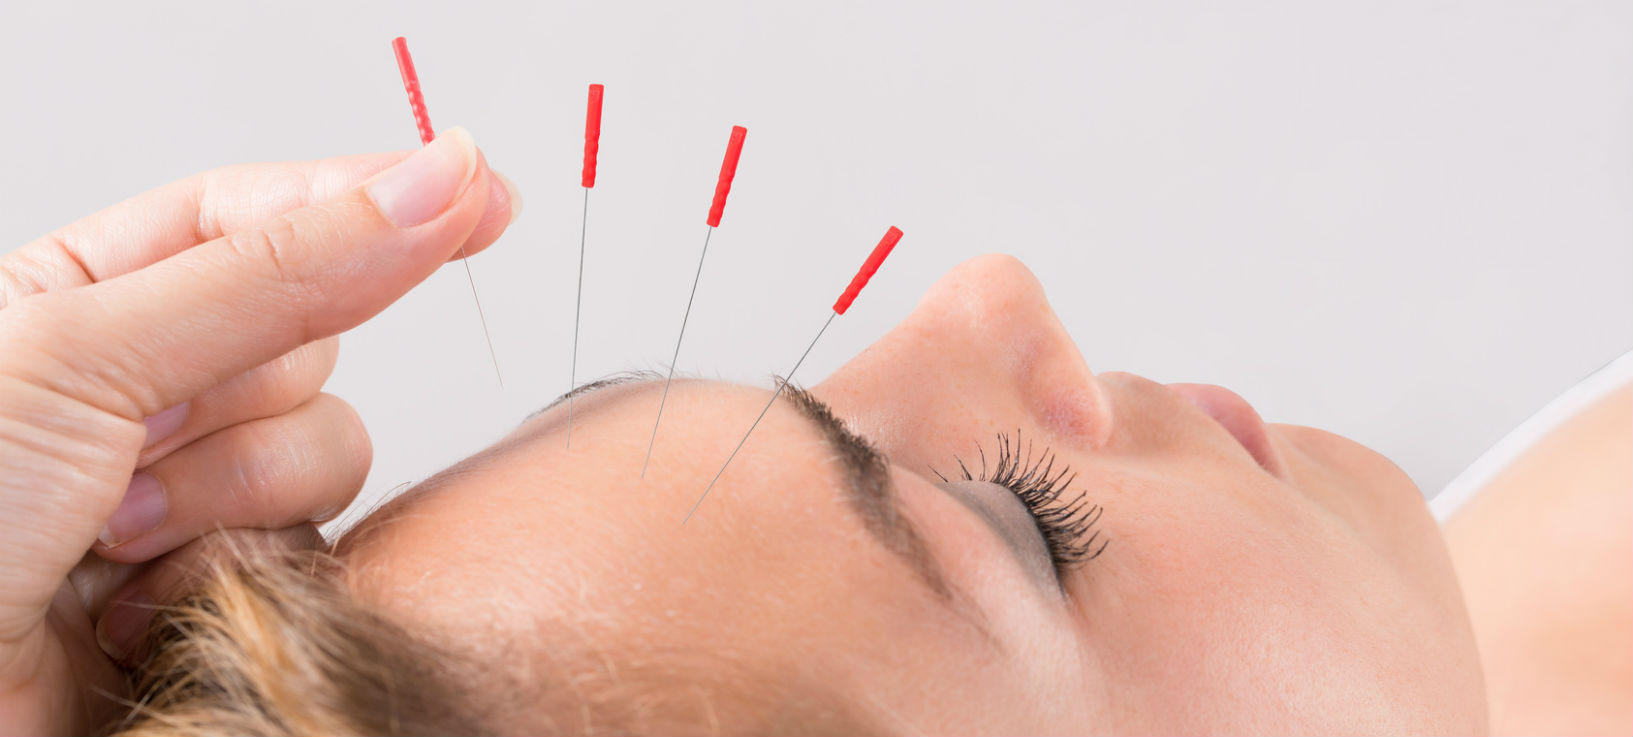 Acupuncture & Naturopathy